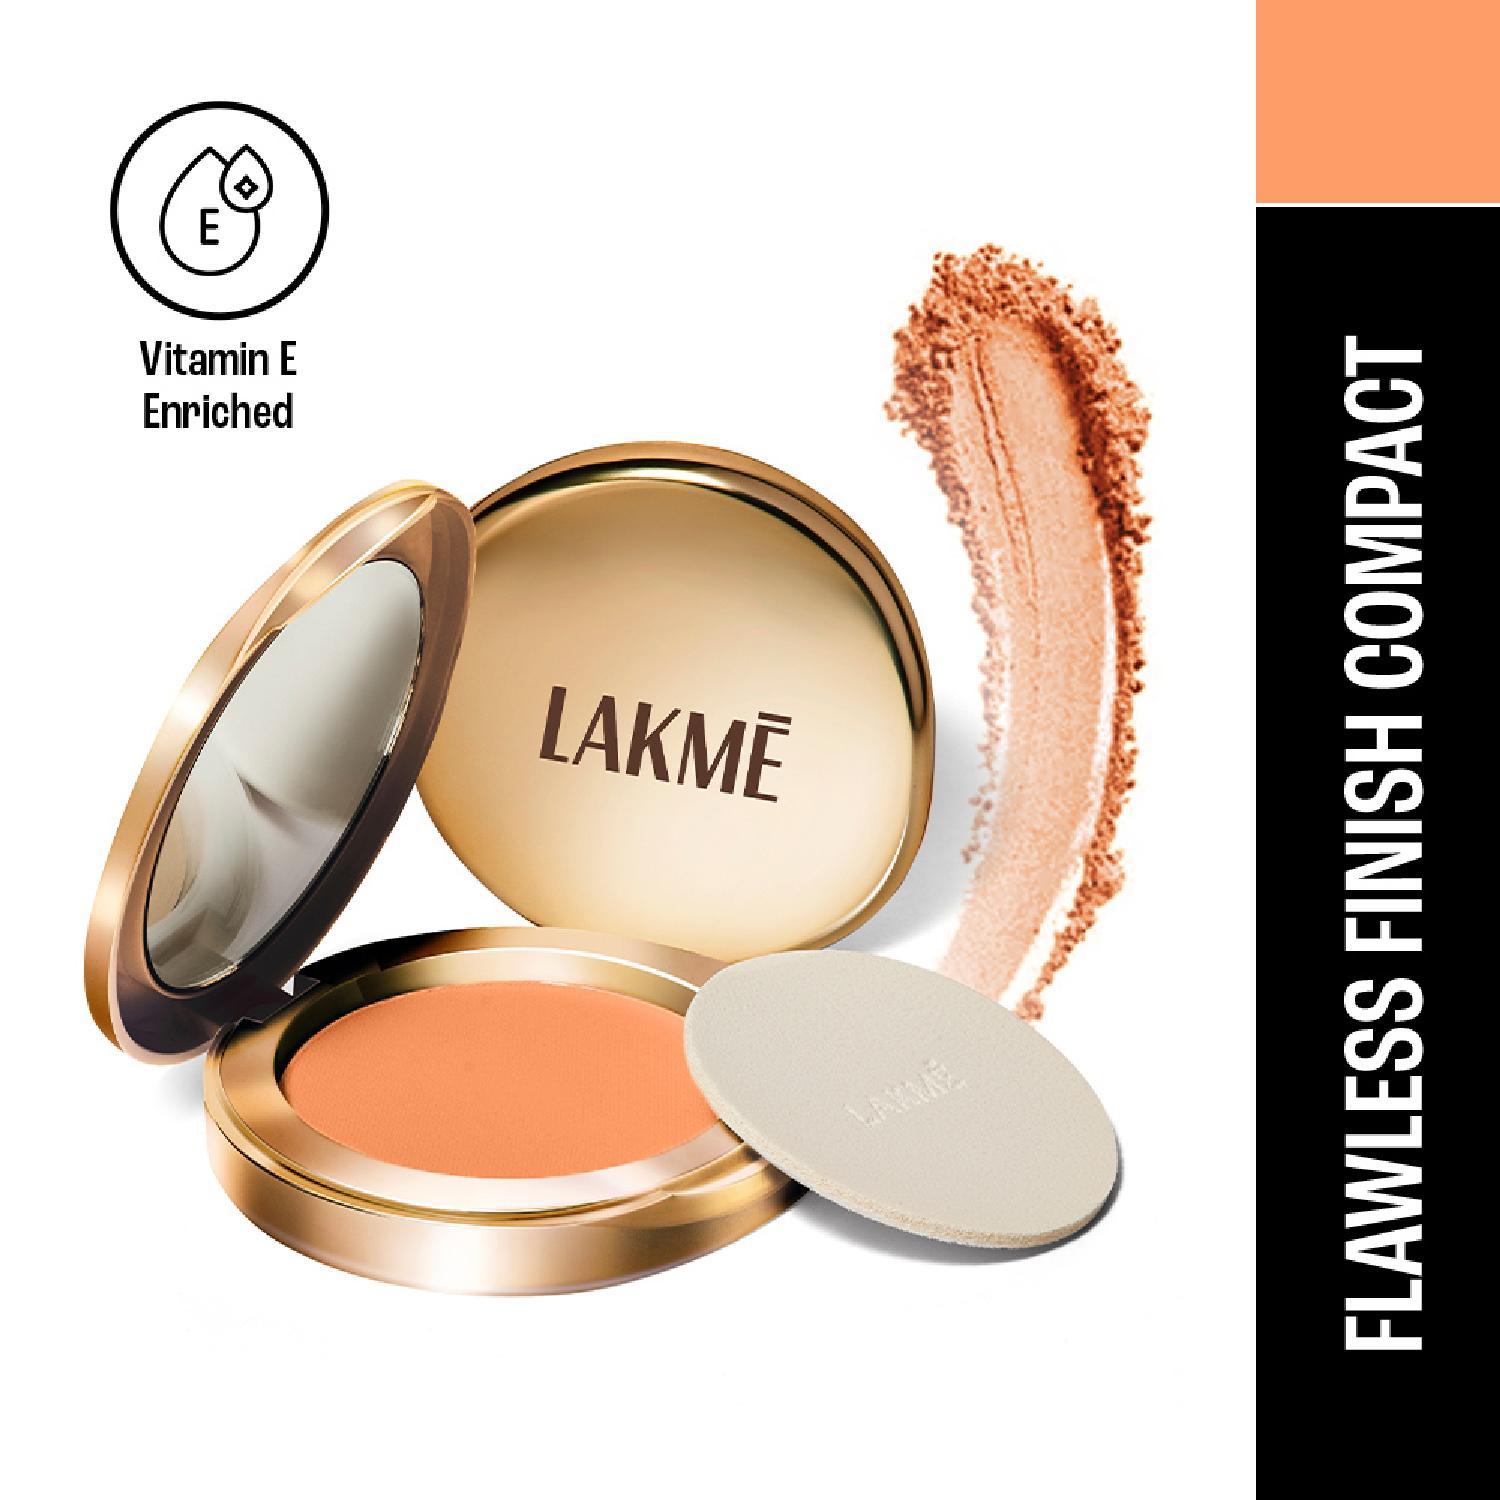 Lakme | Lakme 9 to 5 Powerplay Matte Compact, Oil Control Formula, With Vitamin E, Apricot (9g)